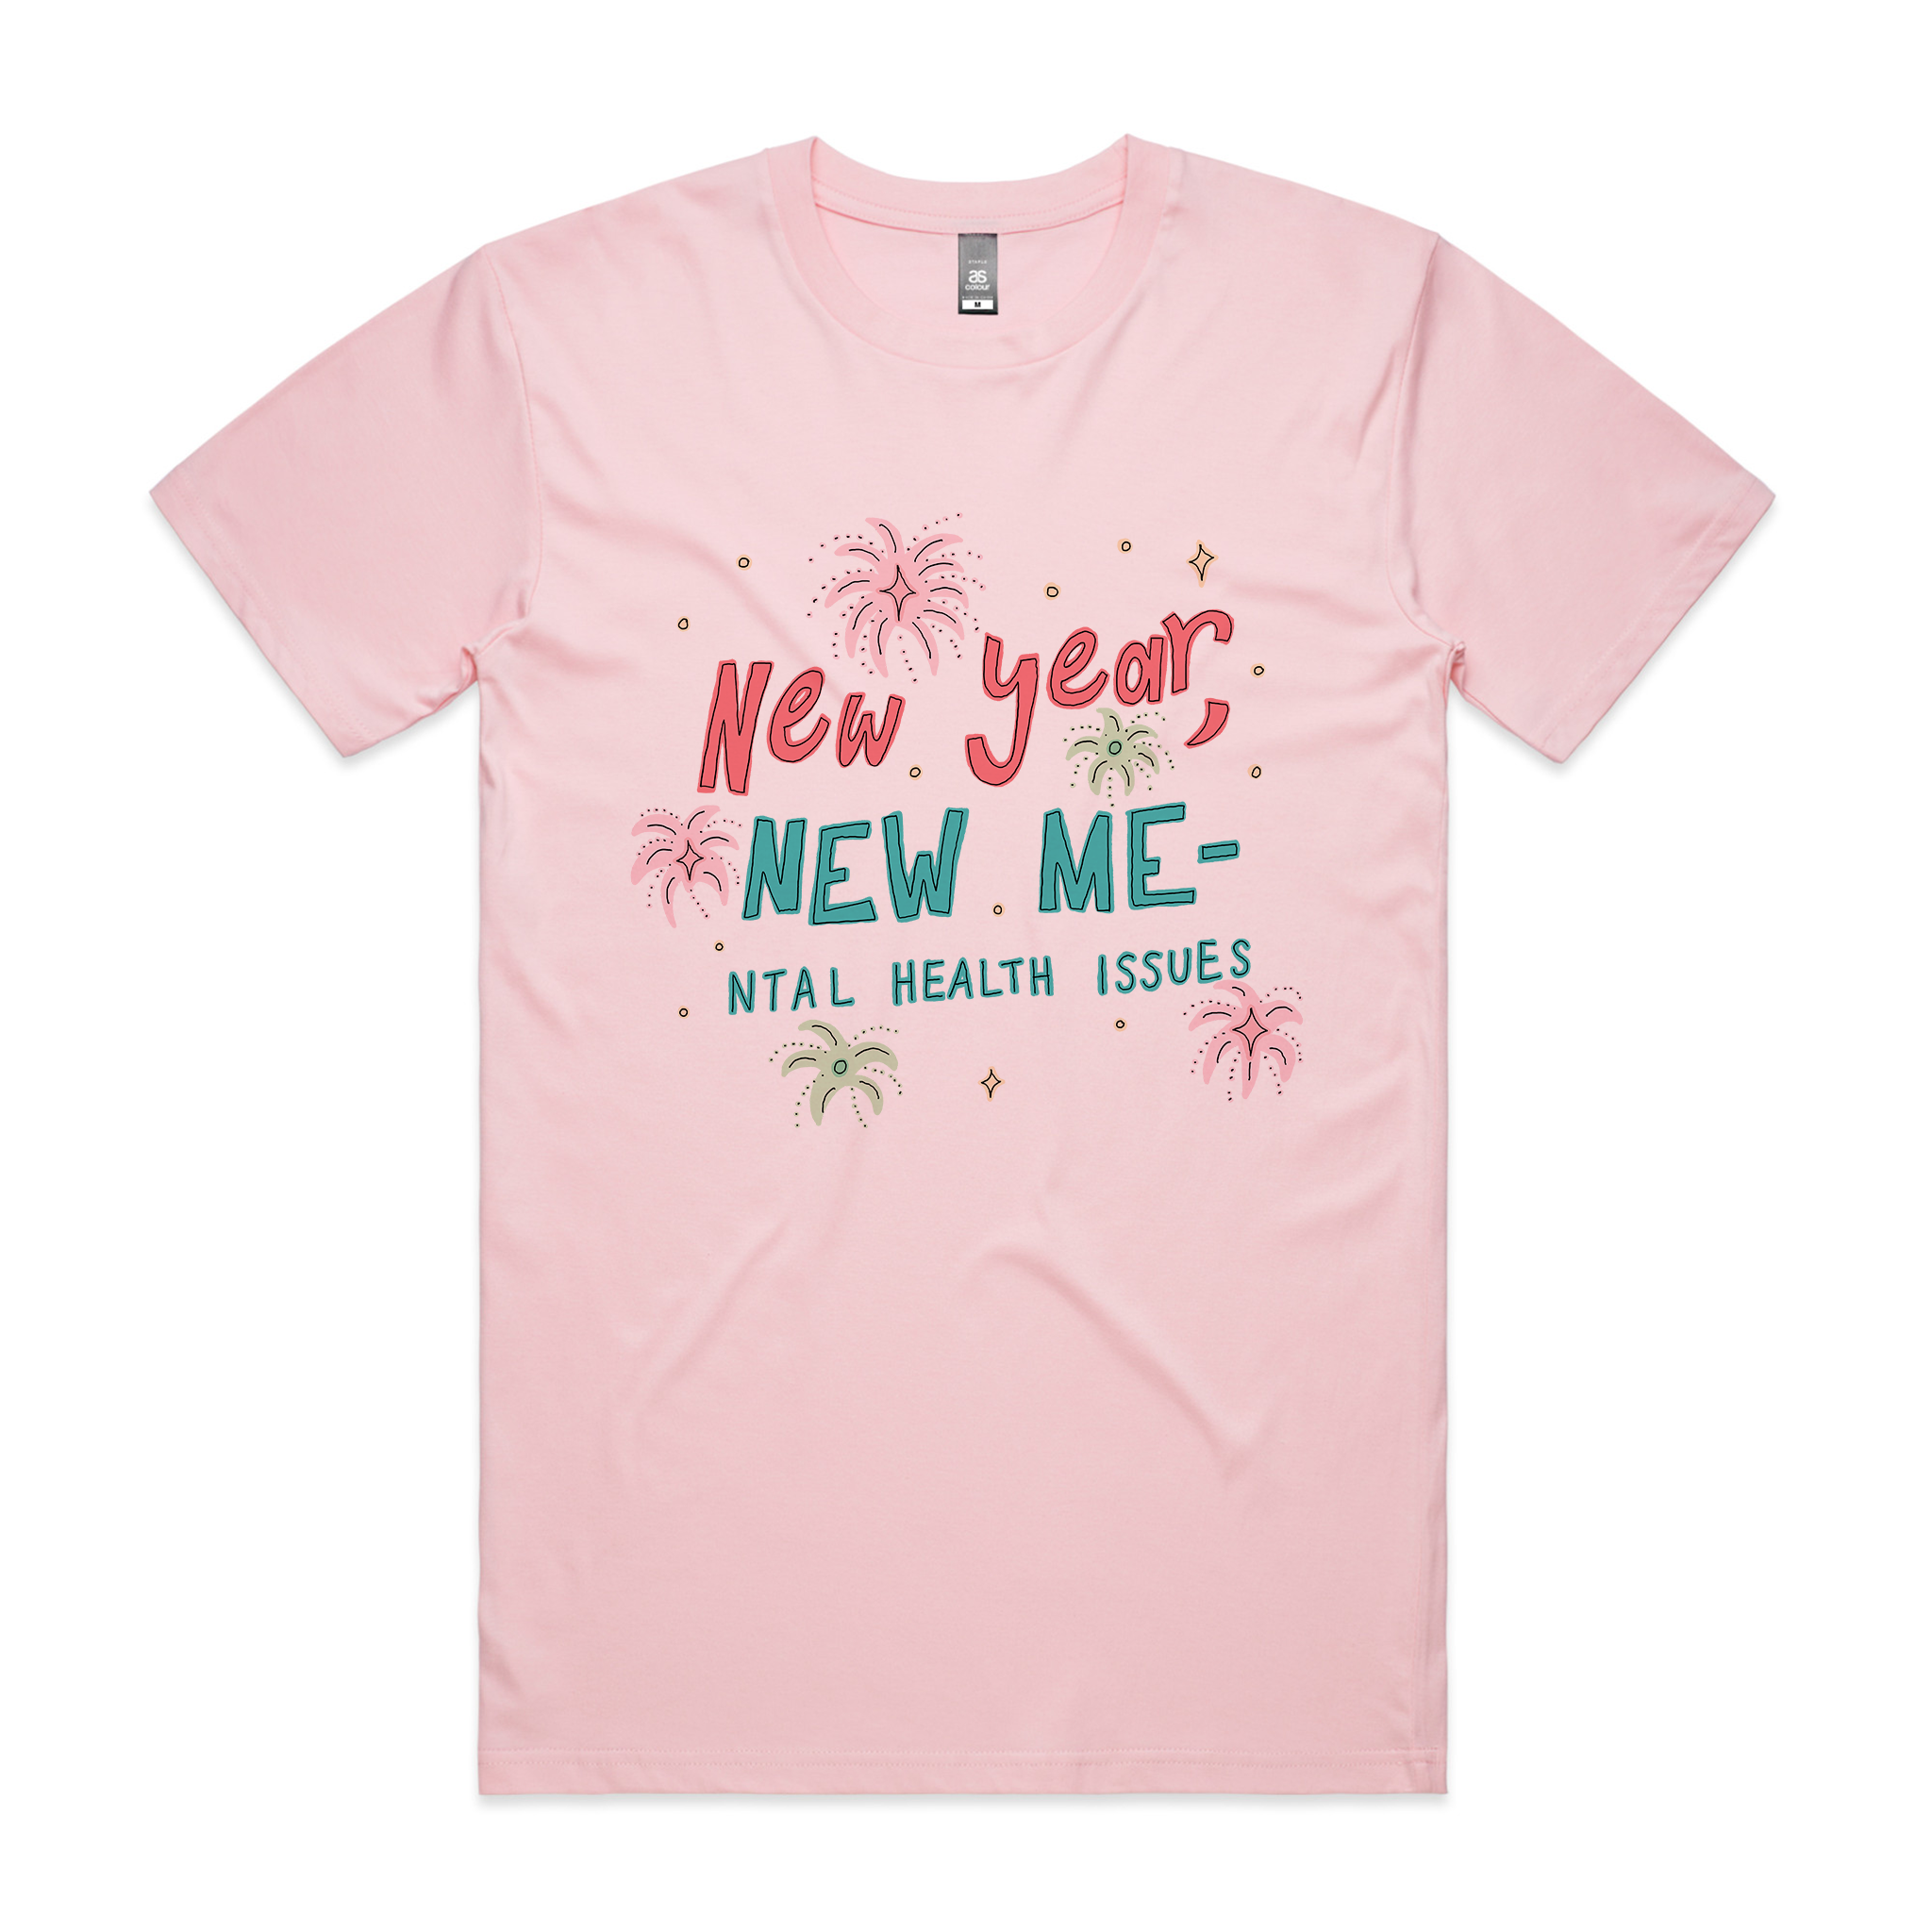 New Year, New Me Tee